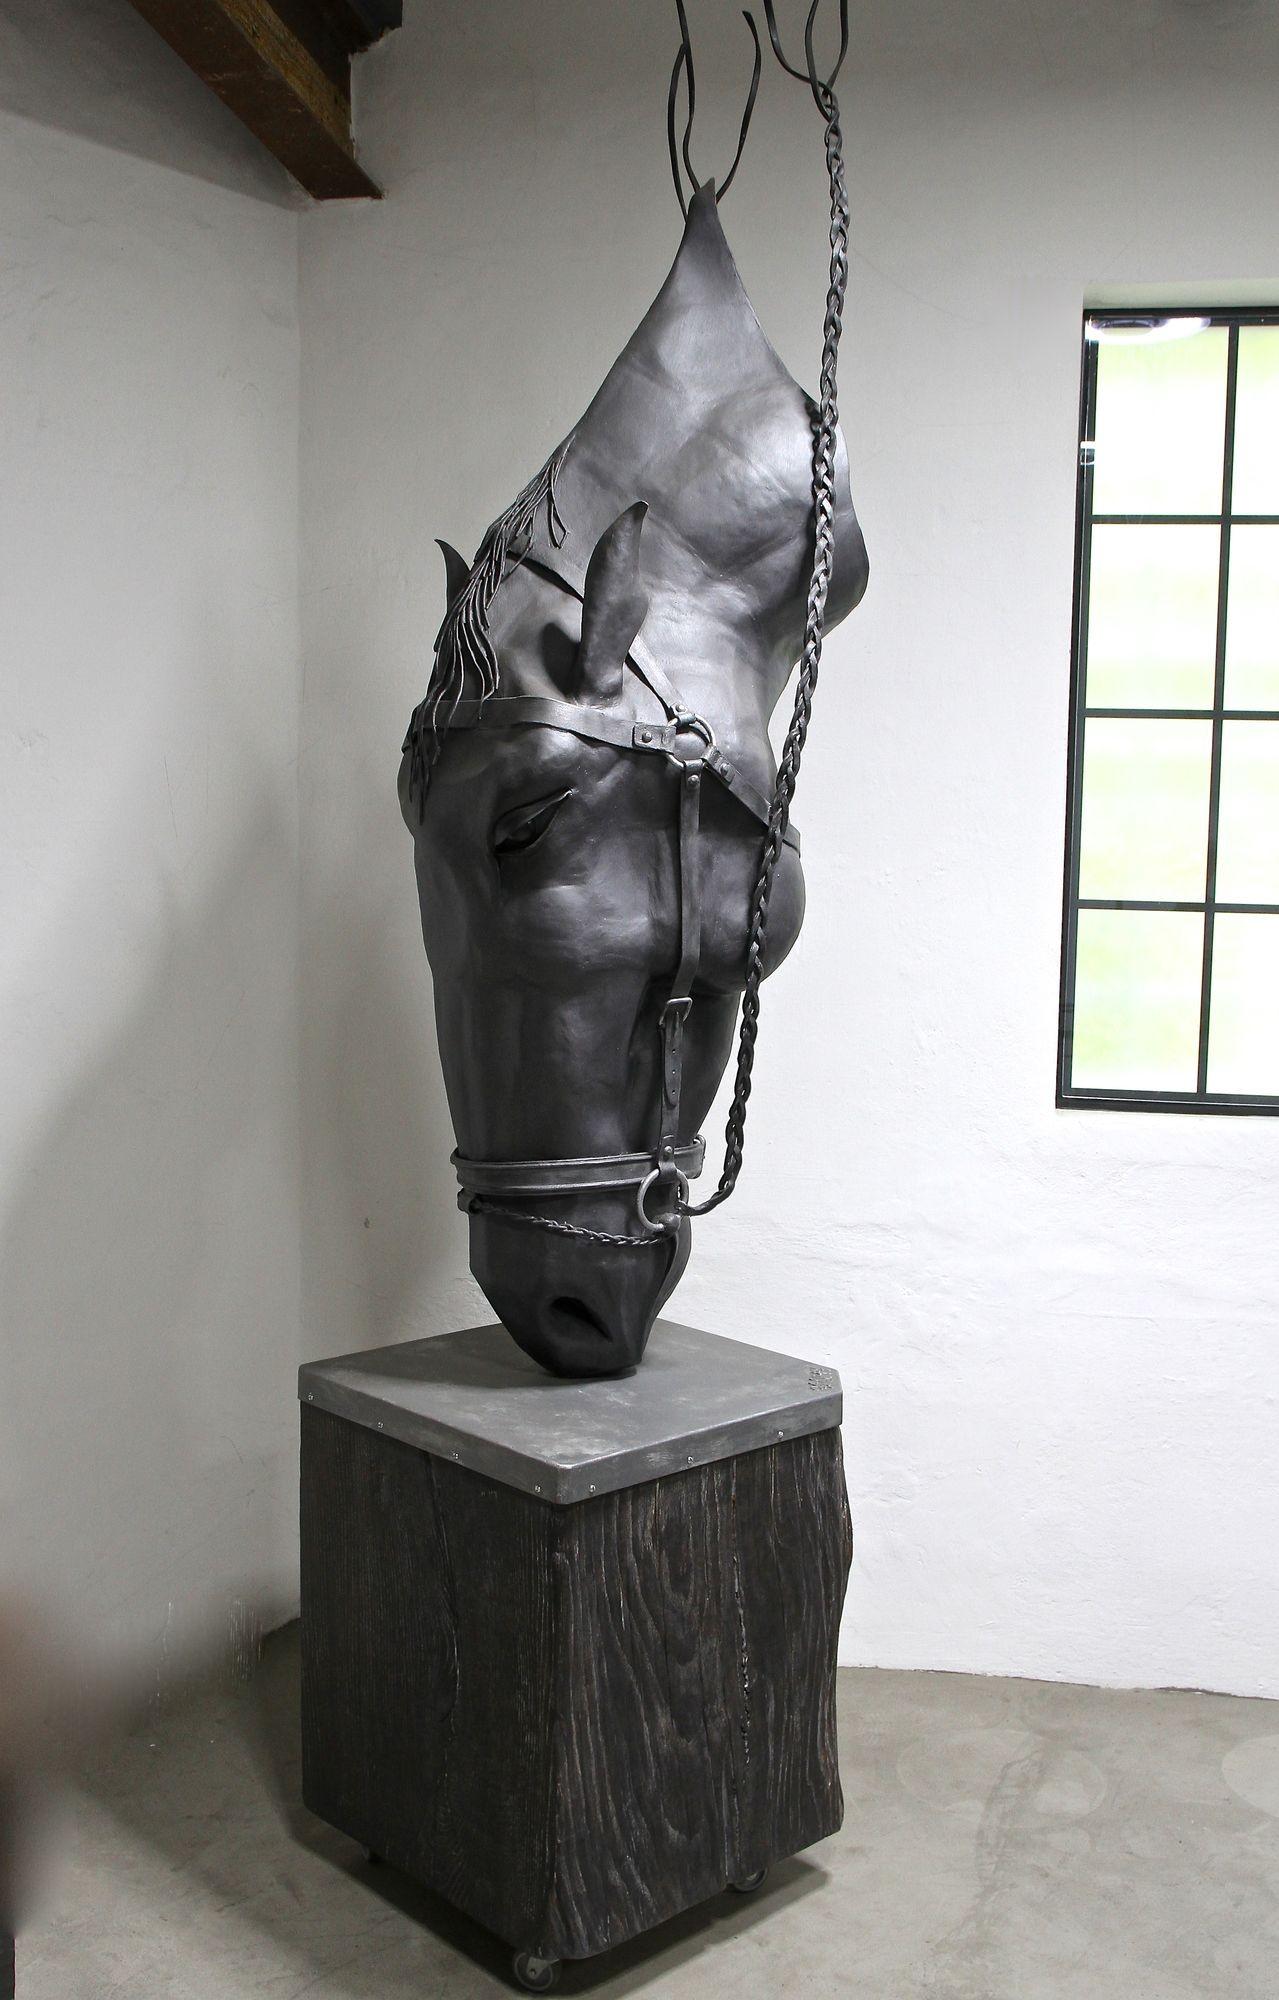 Metal Horse Head Sculpture by G. Fössl, Hand Forged on Charred Oak Base, 2017 For Sale 3